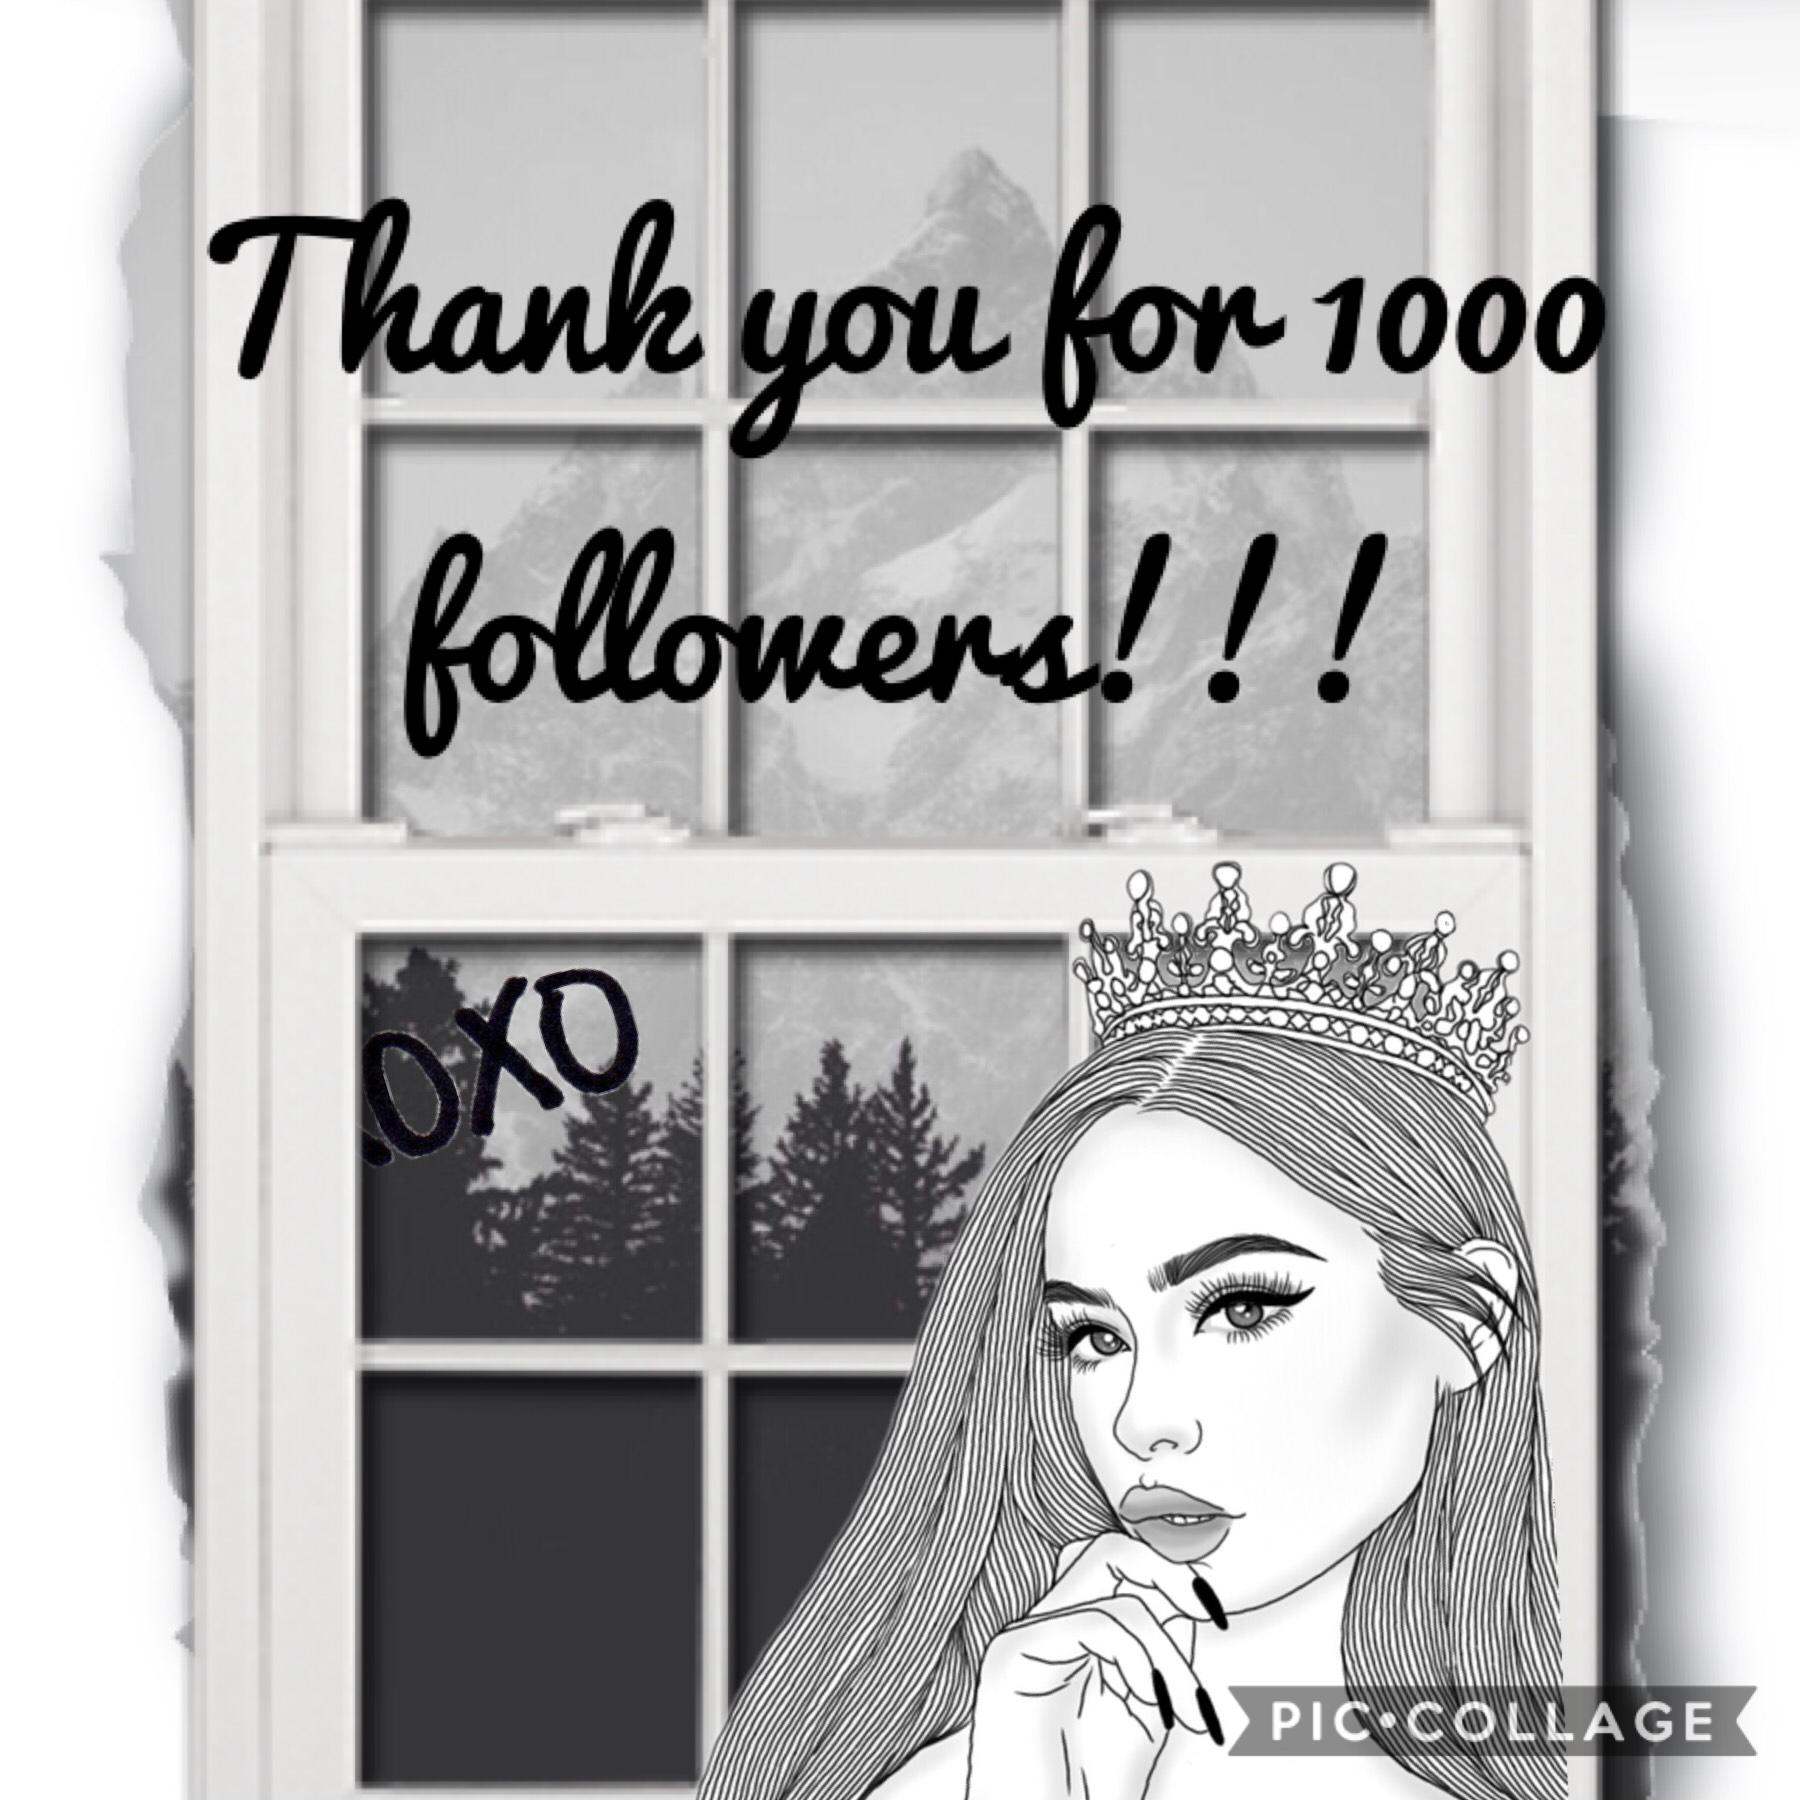 Thank you so much!!!